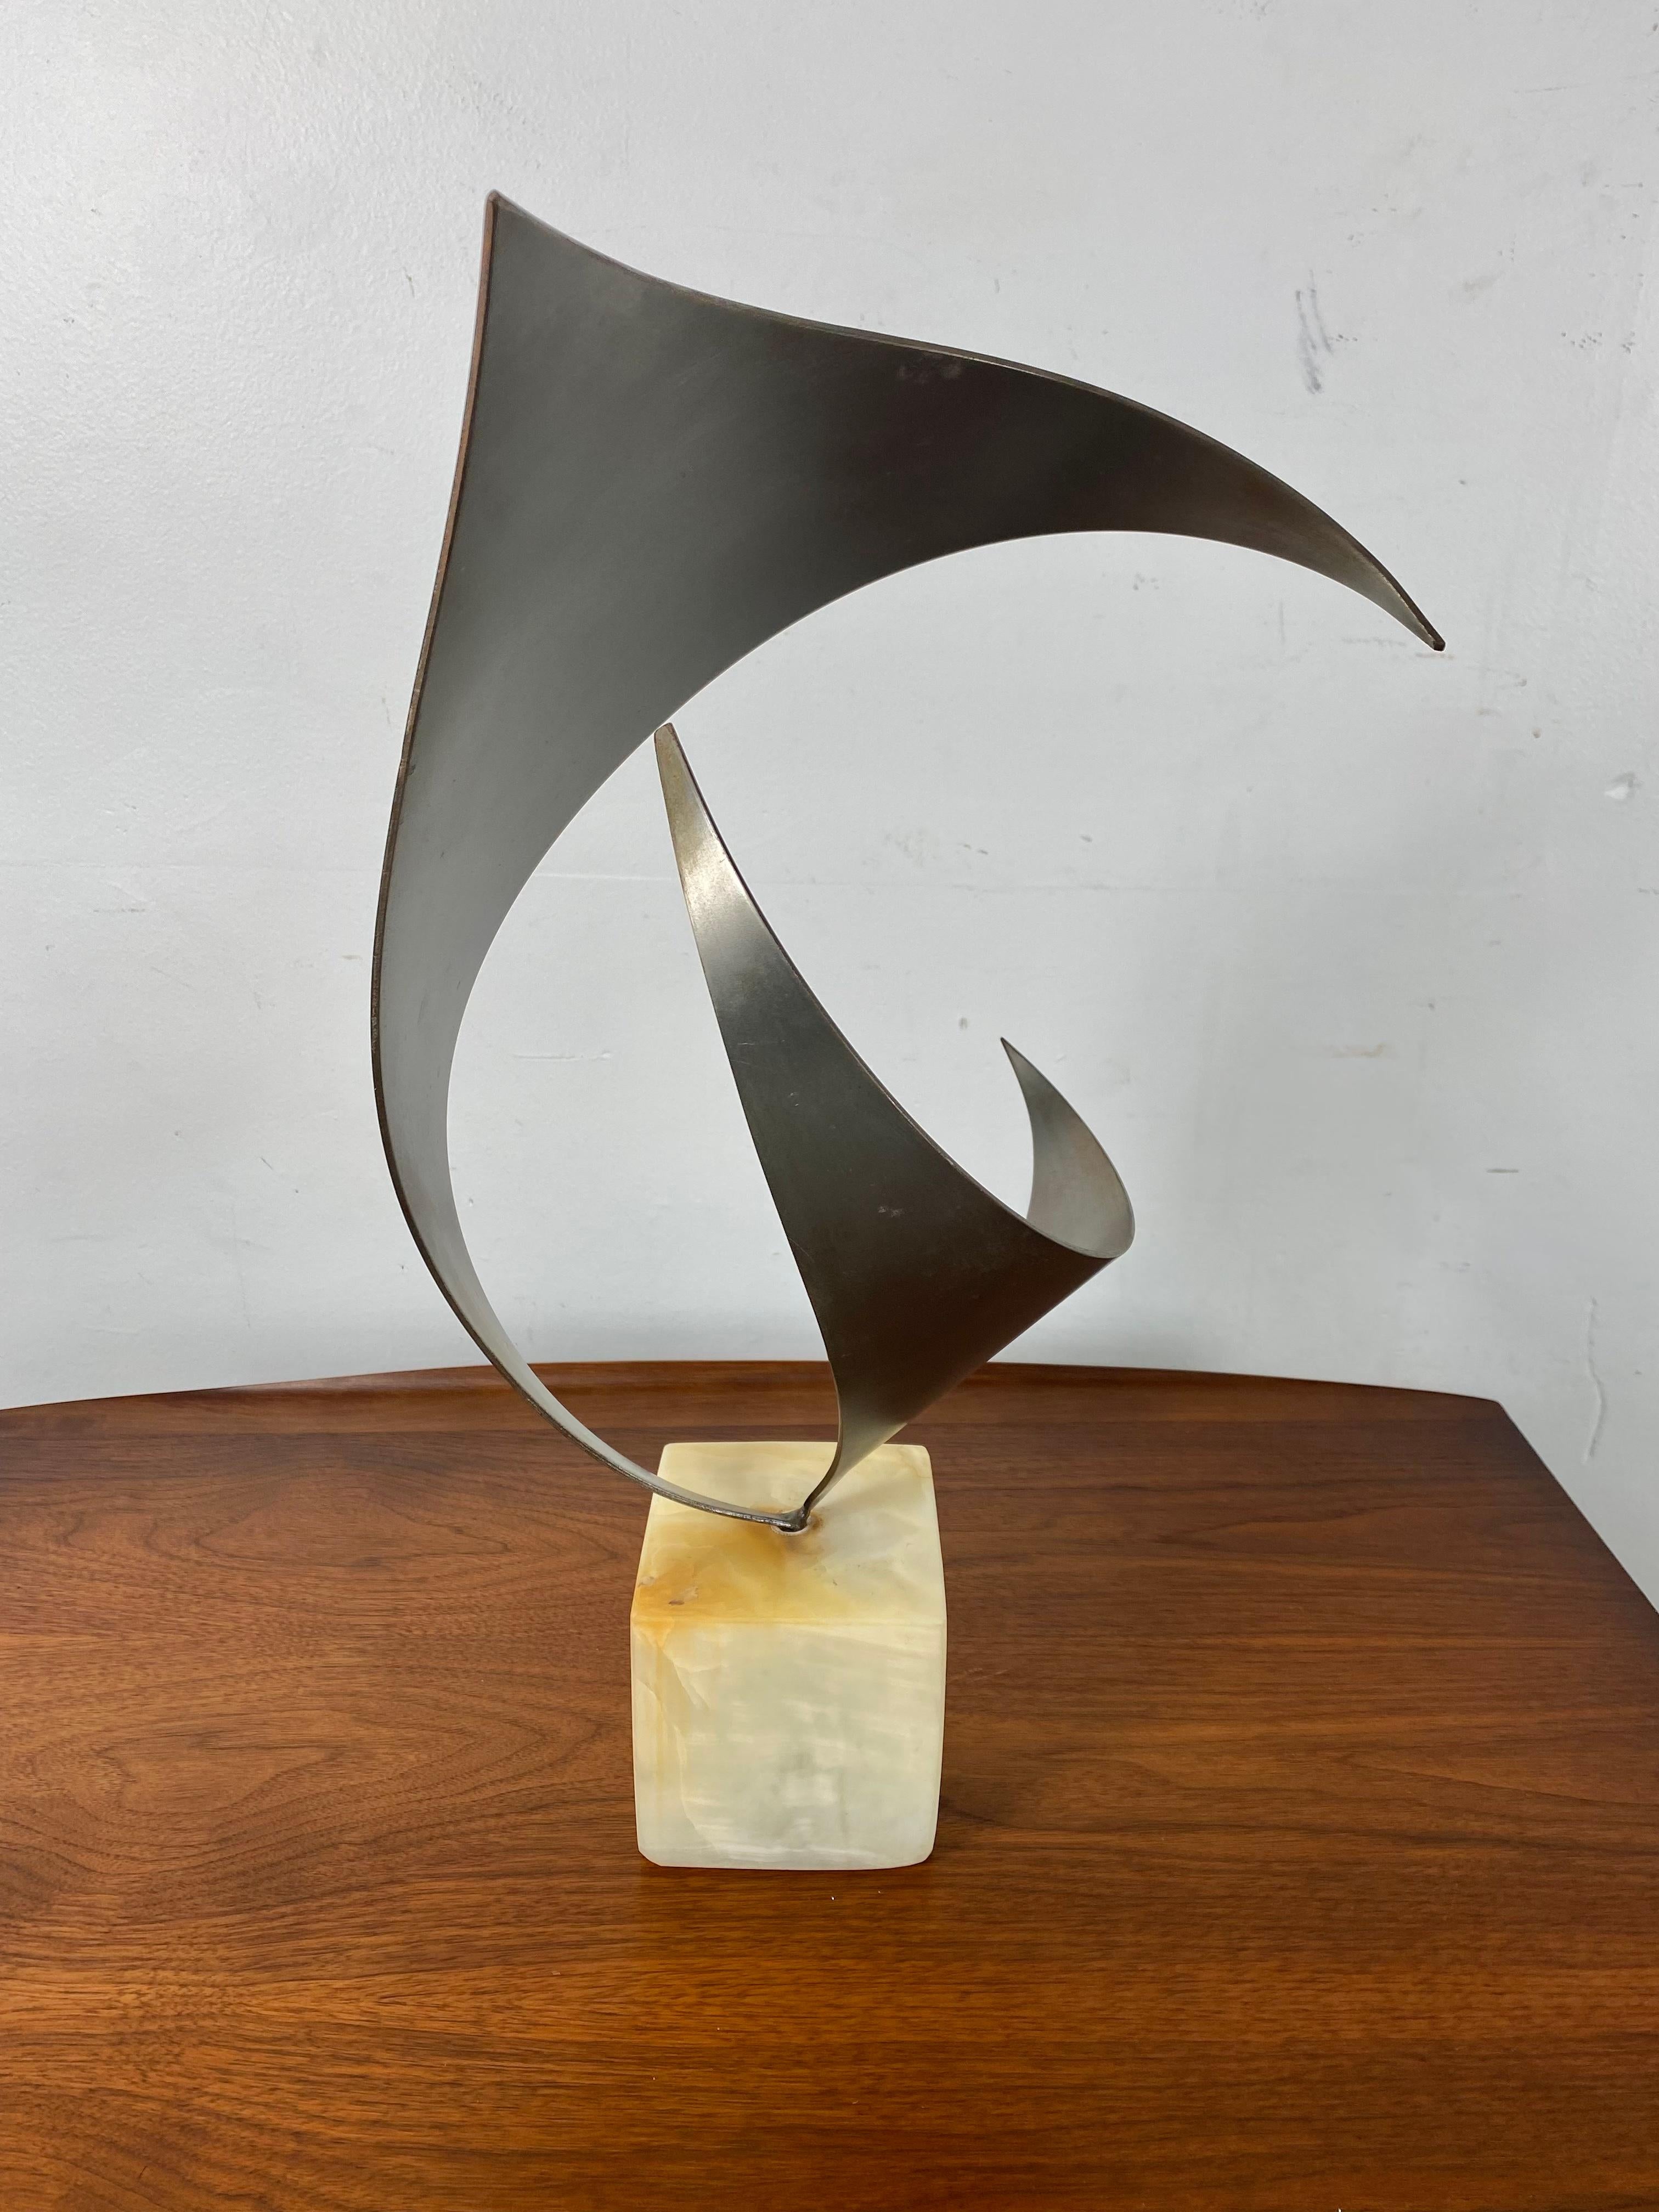 American Modernist Steel and Marble Abstract Table Sculpture by C.Jere c.1980 For Sale